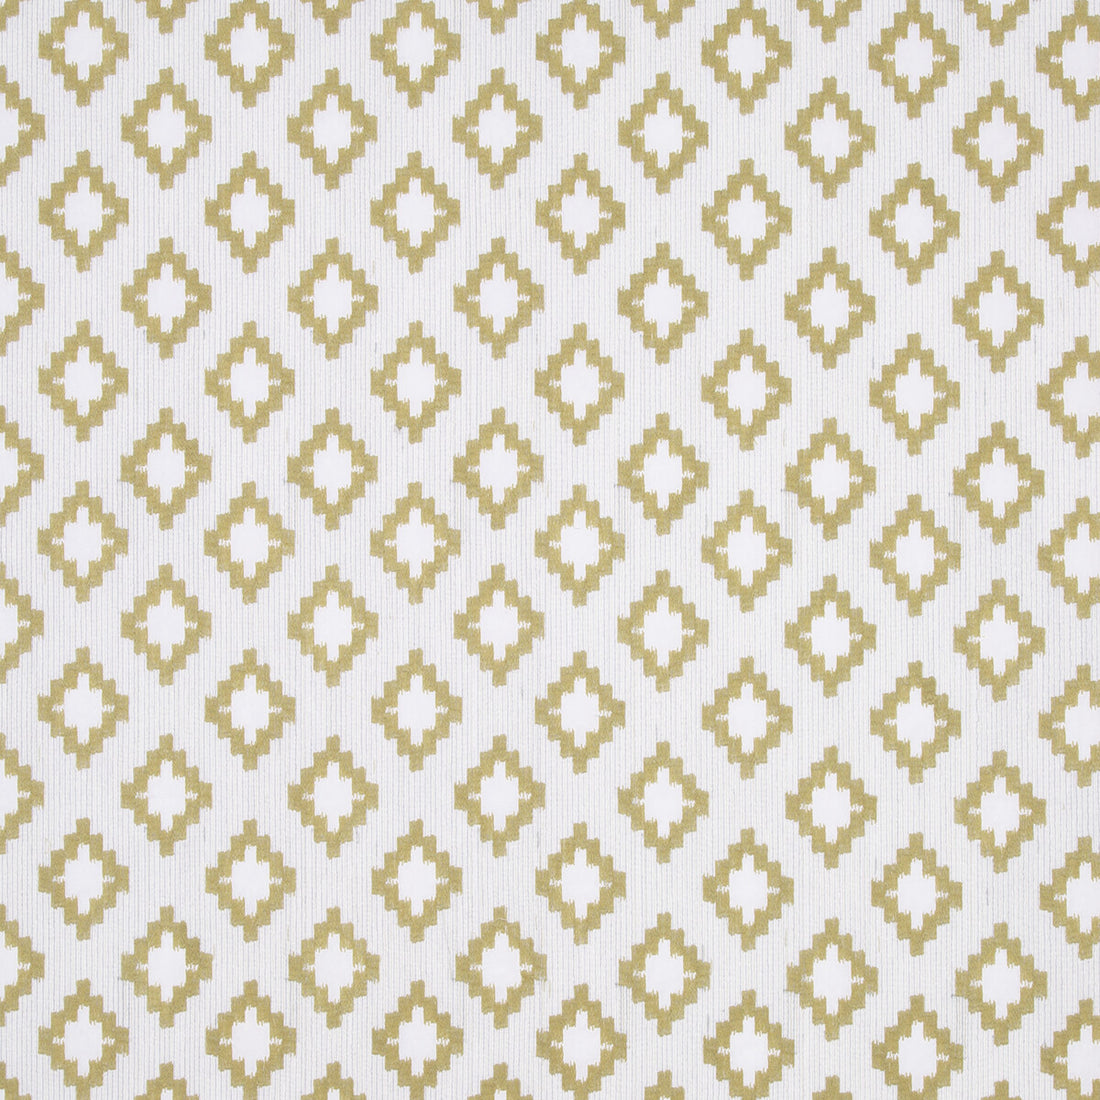 Sefkat fabric in natural color - pattern BF10722.1.0 - by G P &amp; J Baker in the East To West collection